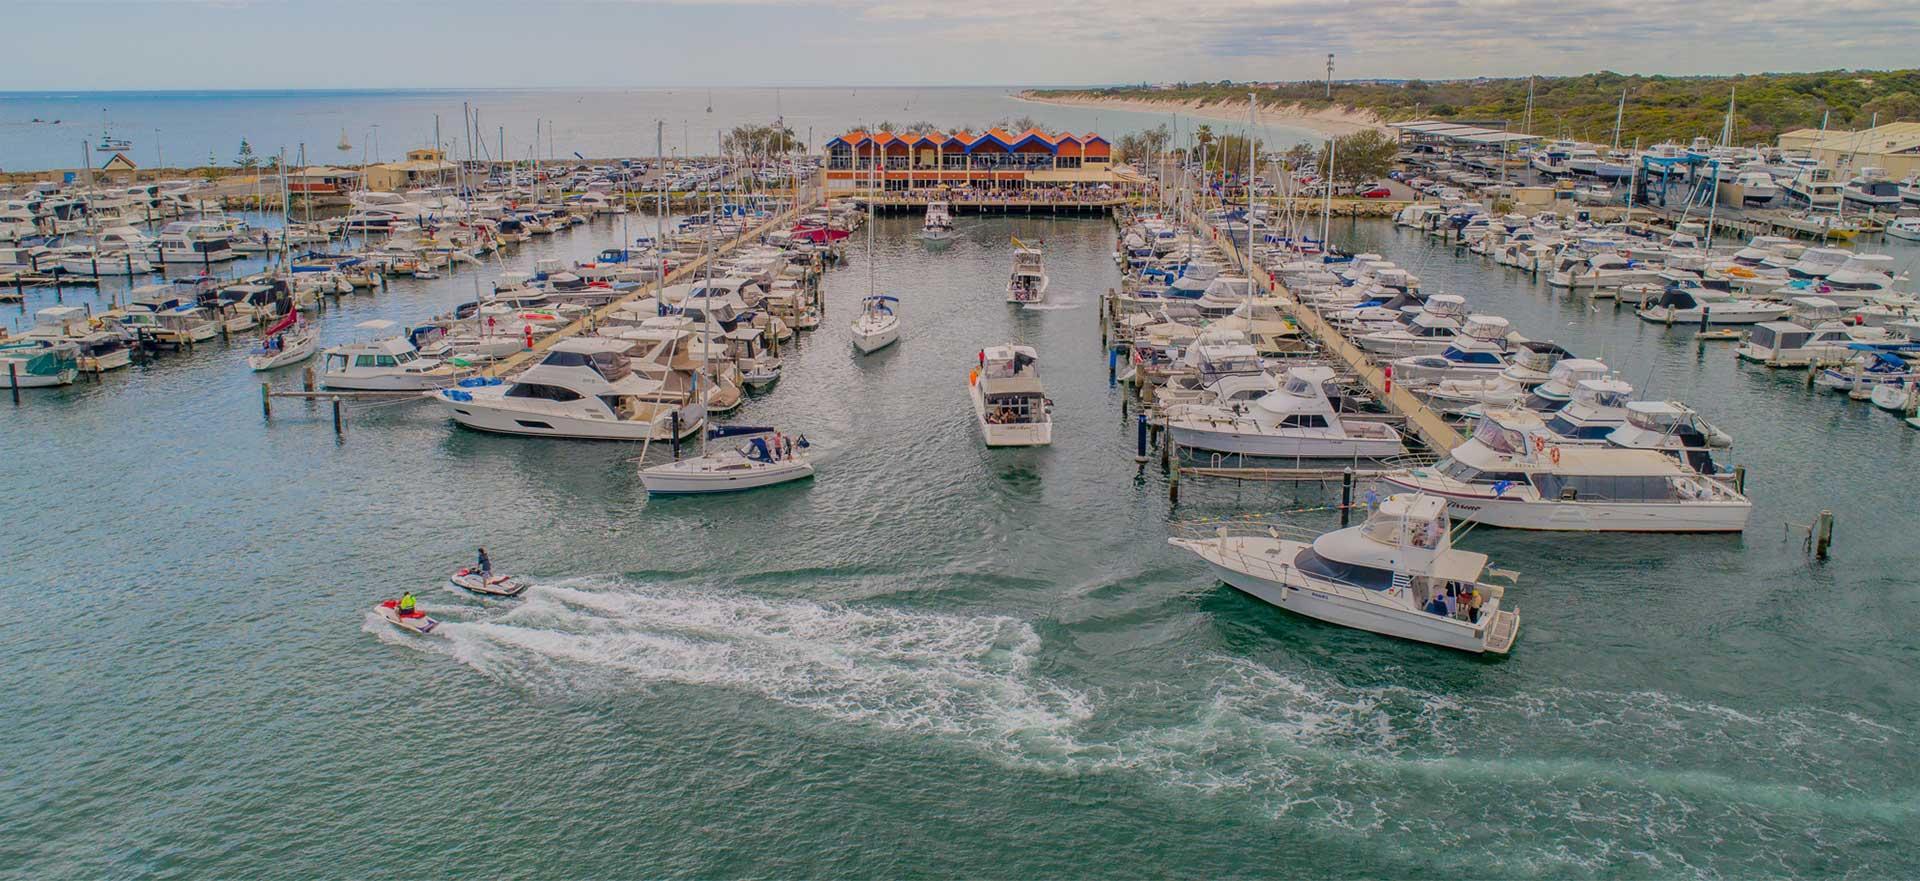 Provide First Aid Expression of interest - Hillarys Yacht Club